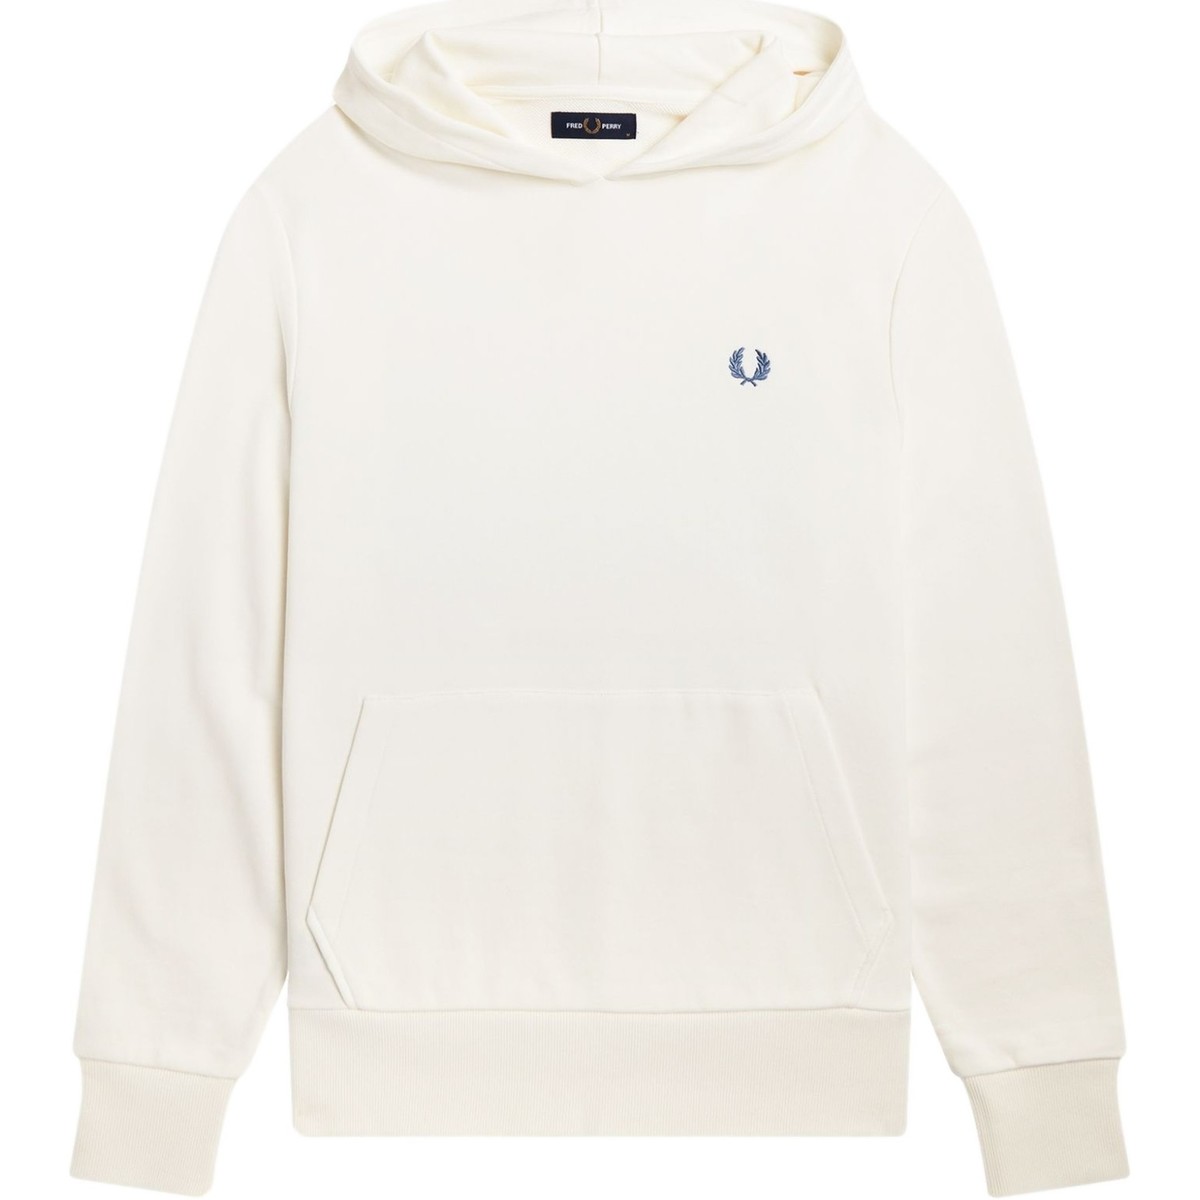 Textiel Heren Sweaters / Sweatshirts Fred Perry  Wit